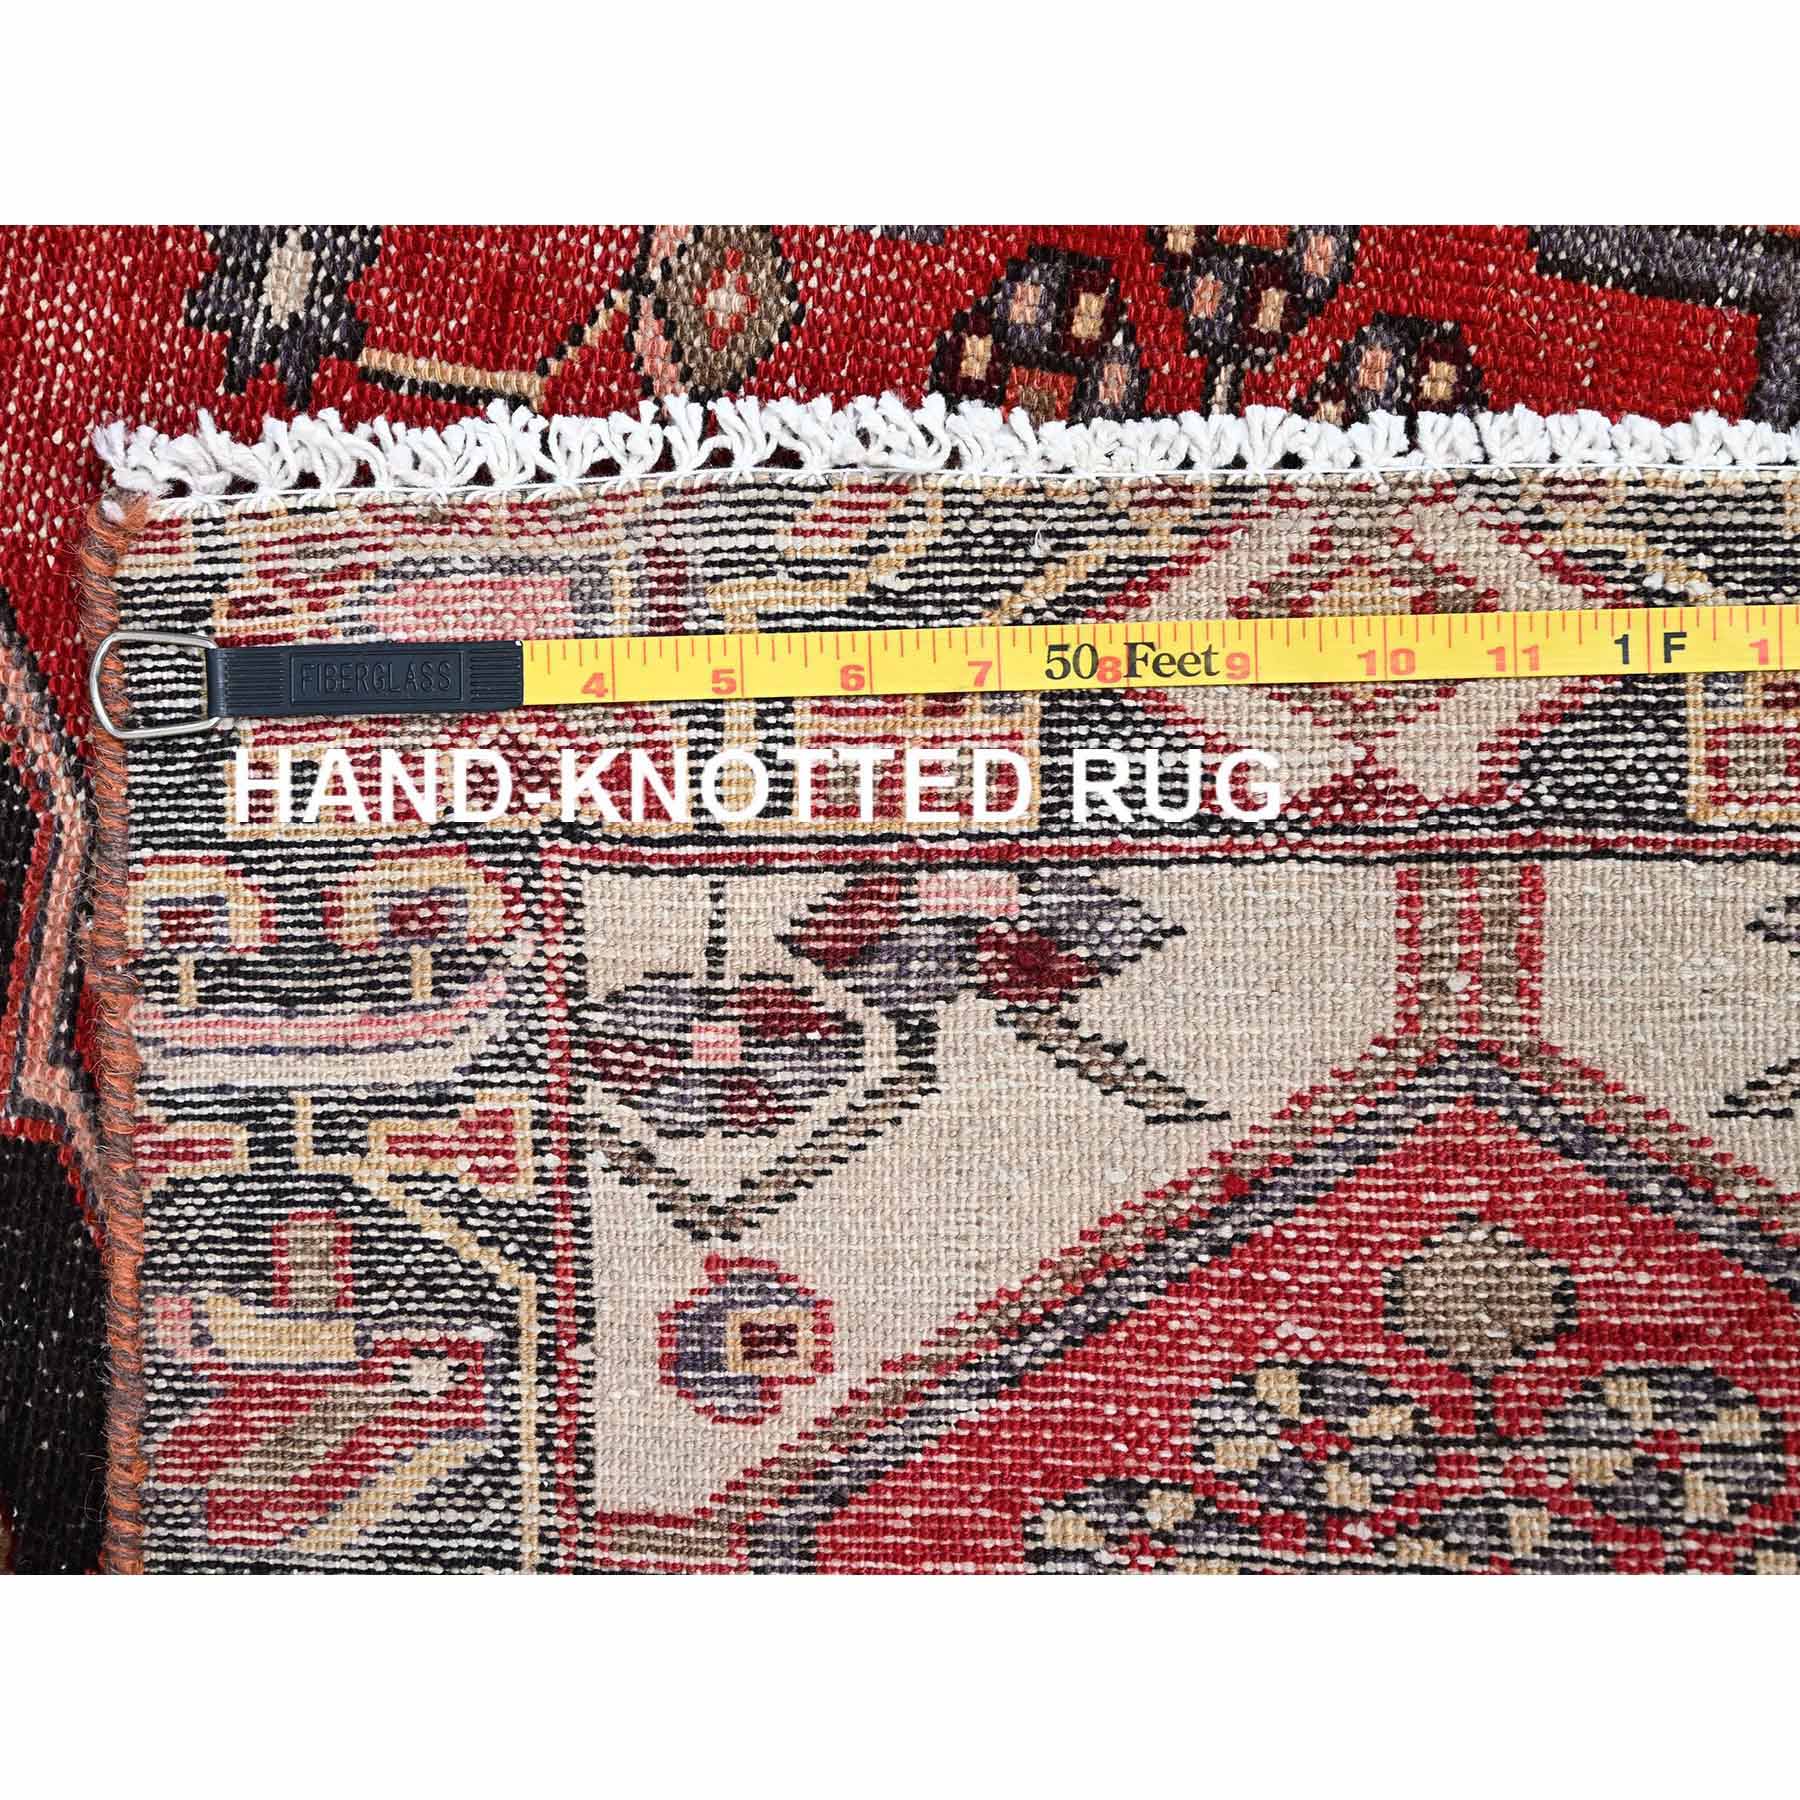 Overdyed-Vintage-Hand-Knotted-Rug-430400